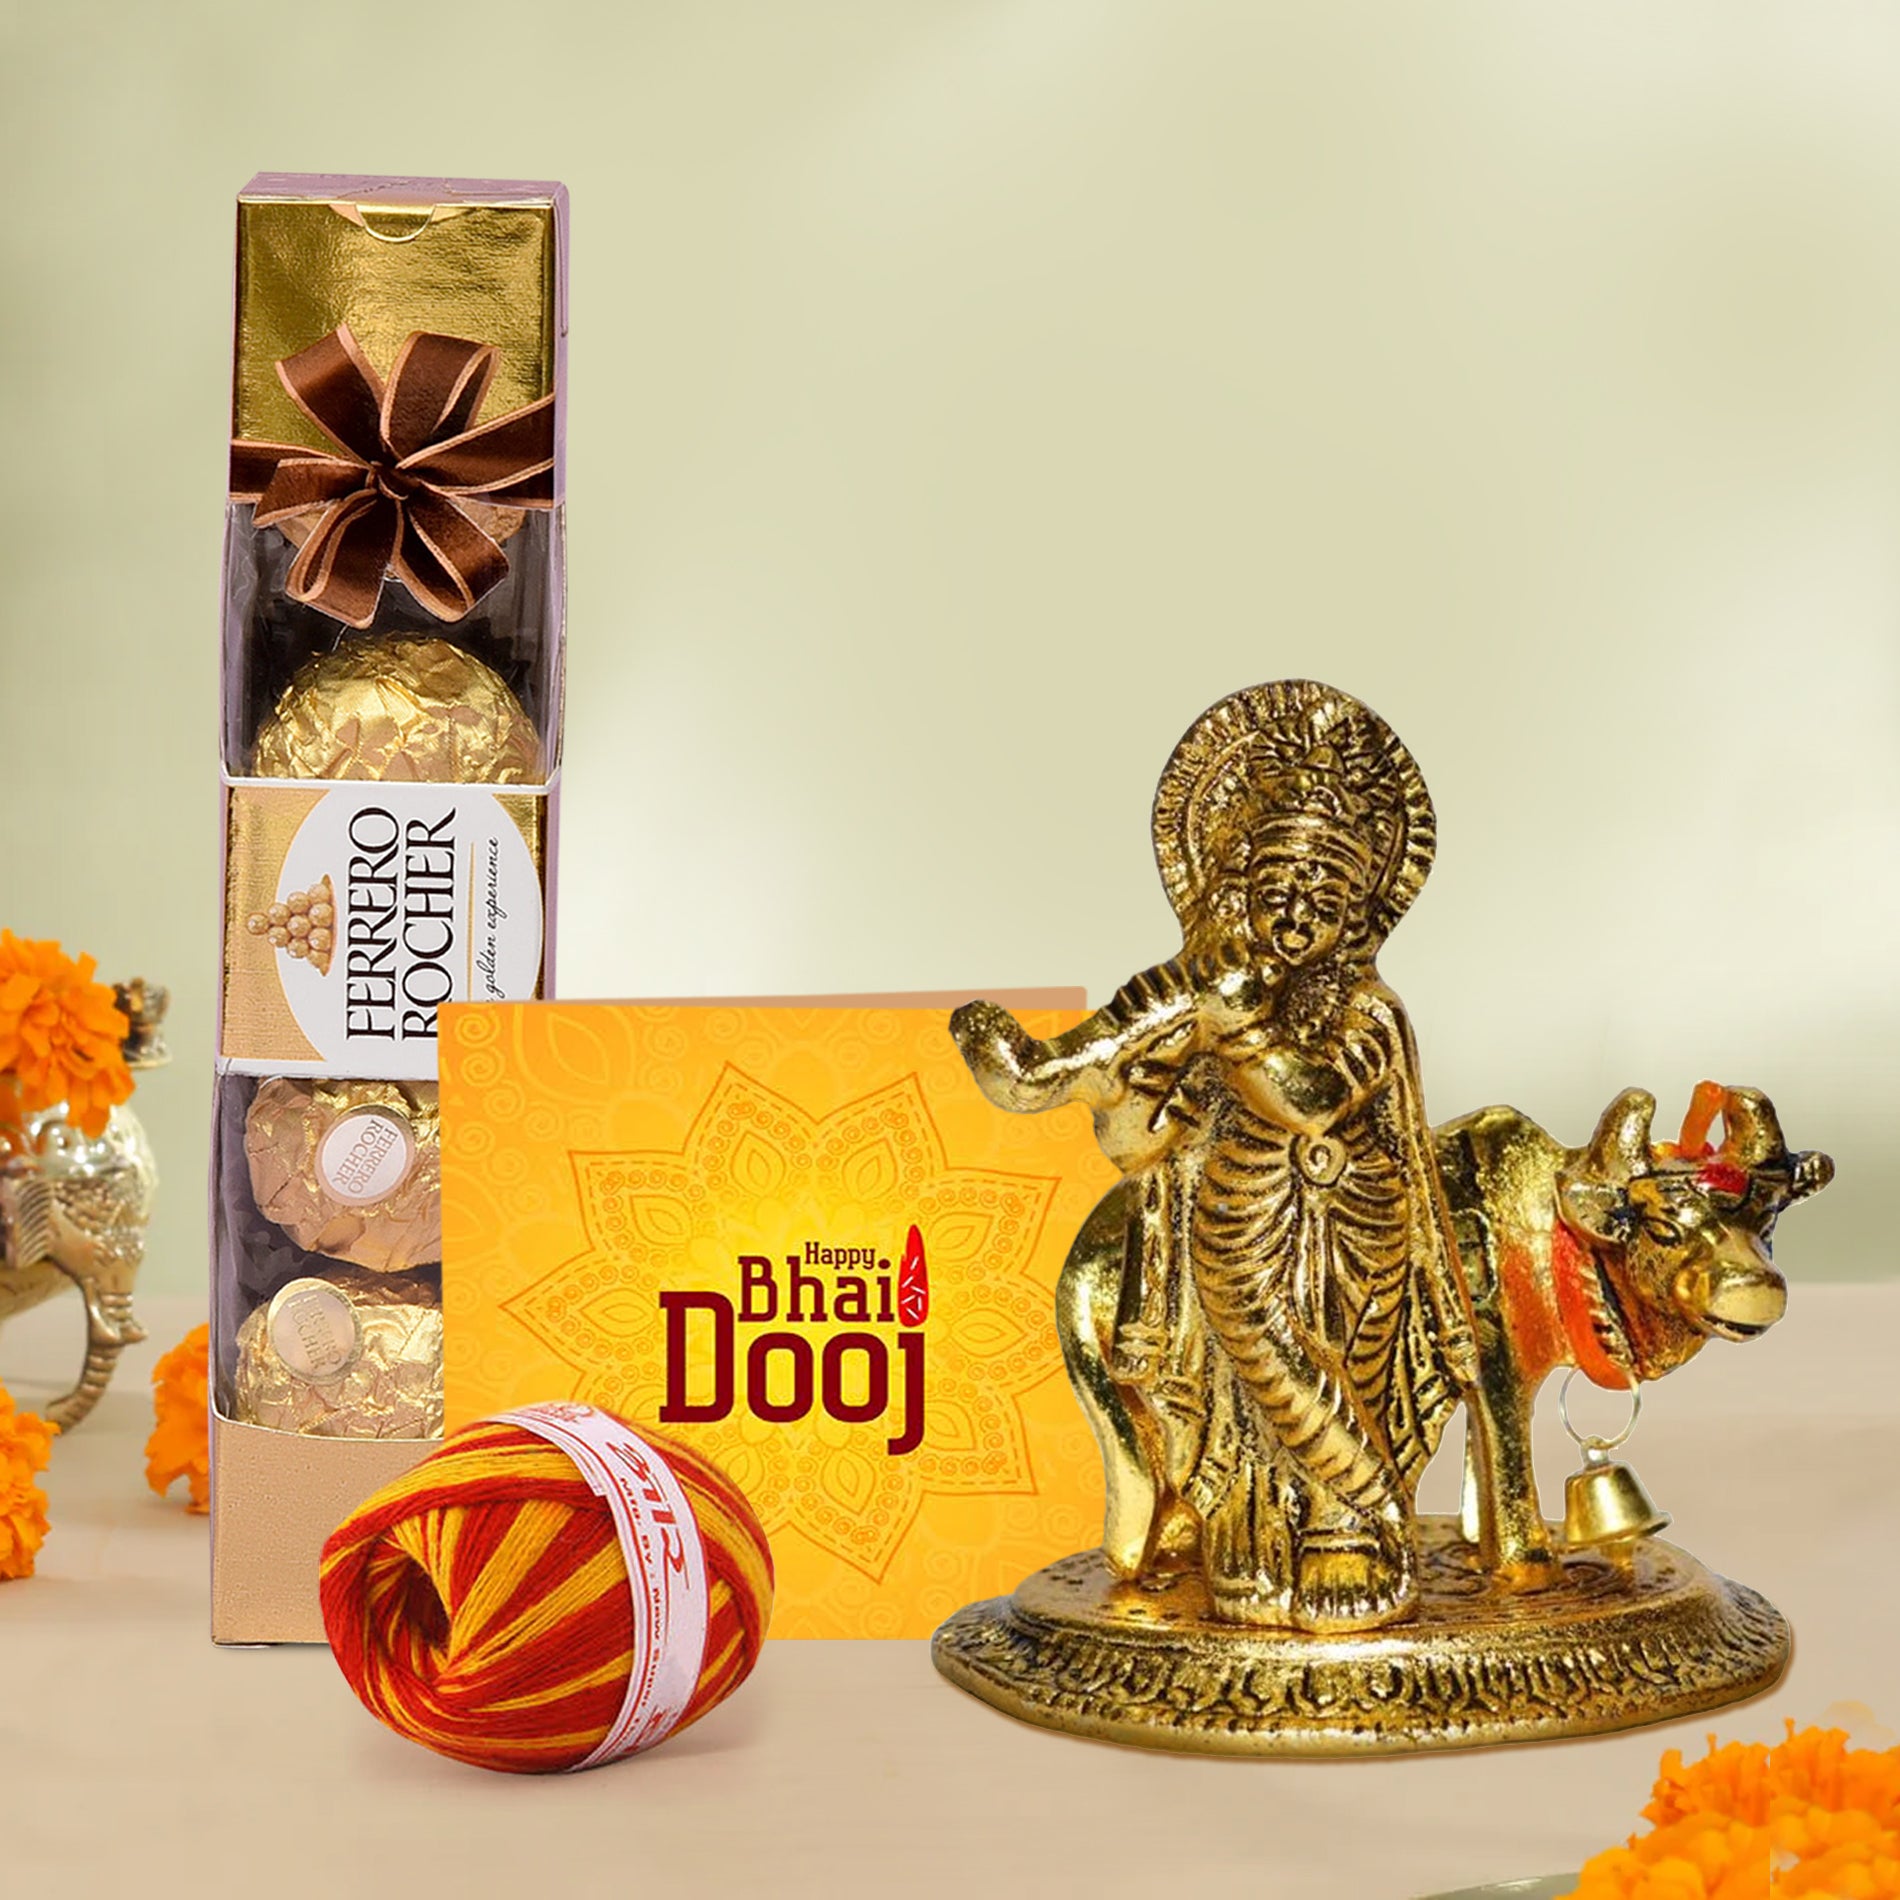 Celebrate This Bhai Dooj With These Perfect Gift Hampers: | by Wilfred Wade  | Medium